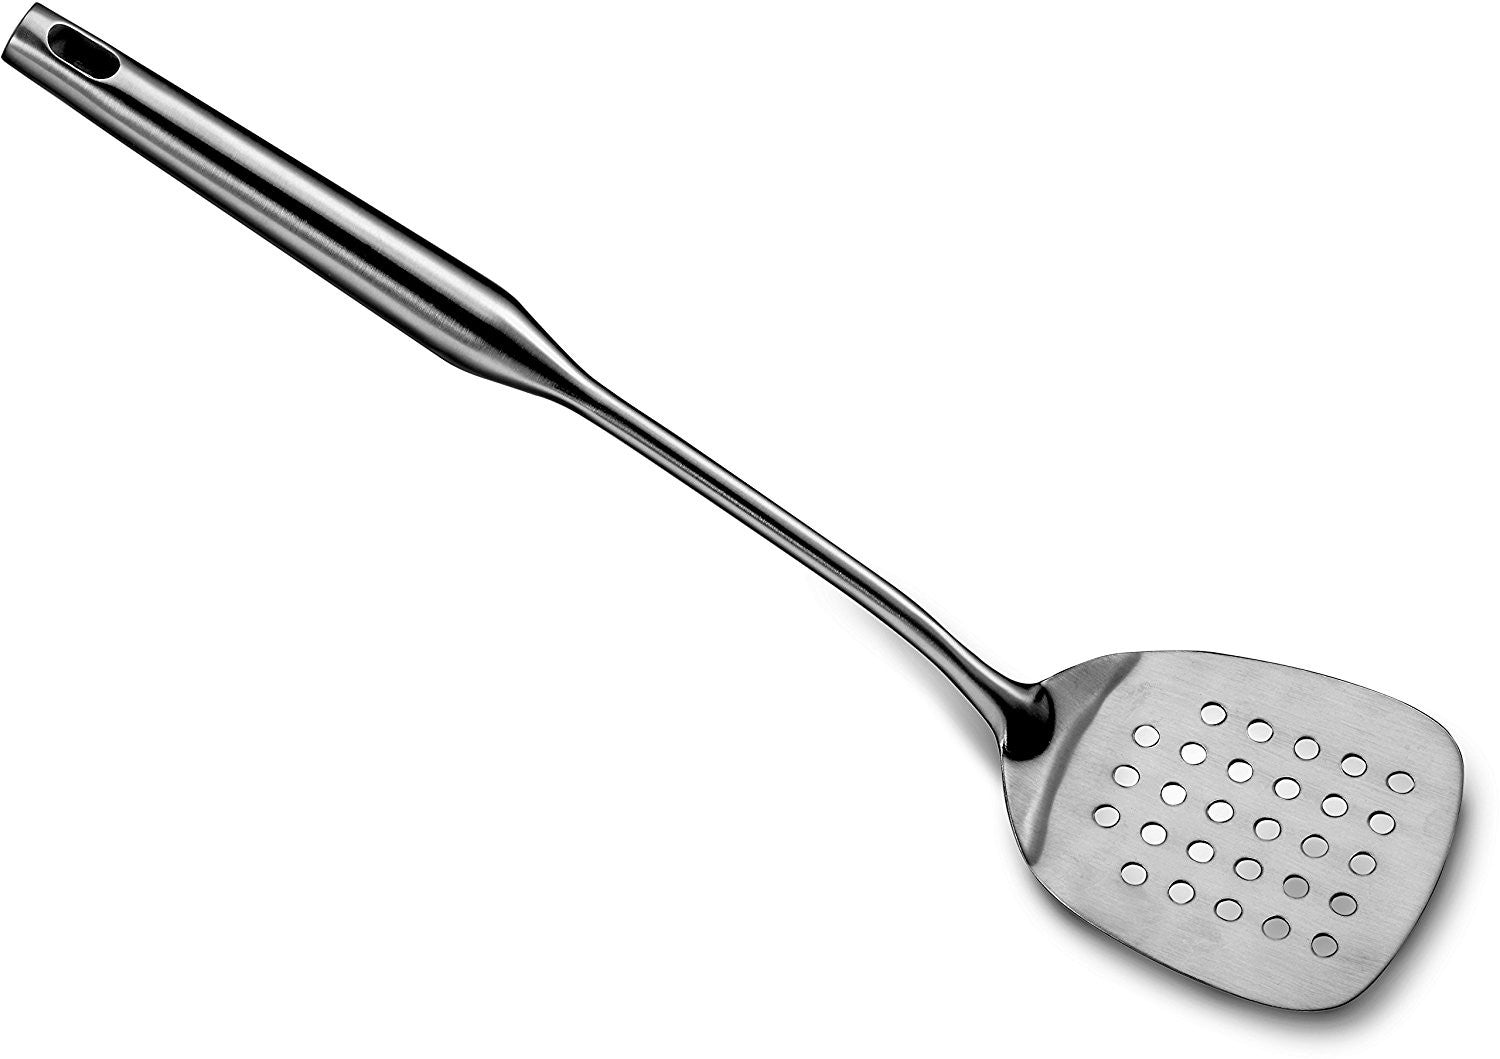 Home Kitchen Non-stick Stainless Steel Wide Pancake Turner Spatula